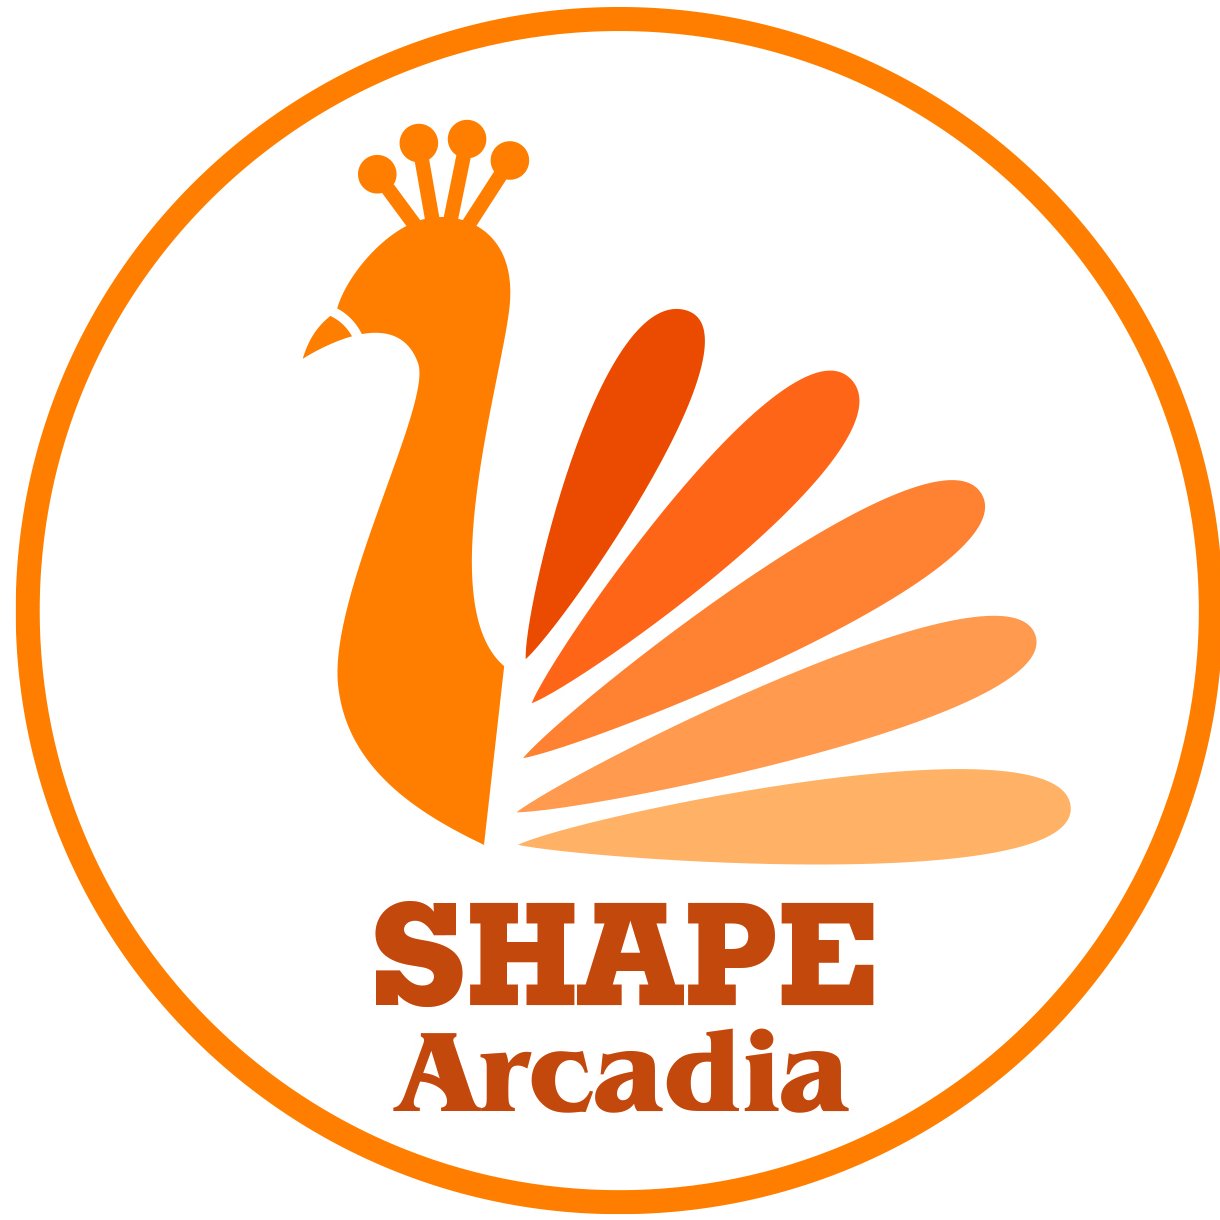 Keep up to date on City projects & smart strategies that promote economic growth & sustainability to enhance Arcadia’s unique cultural and historical character.